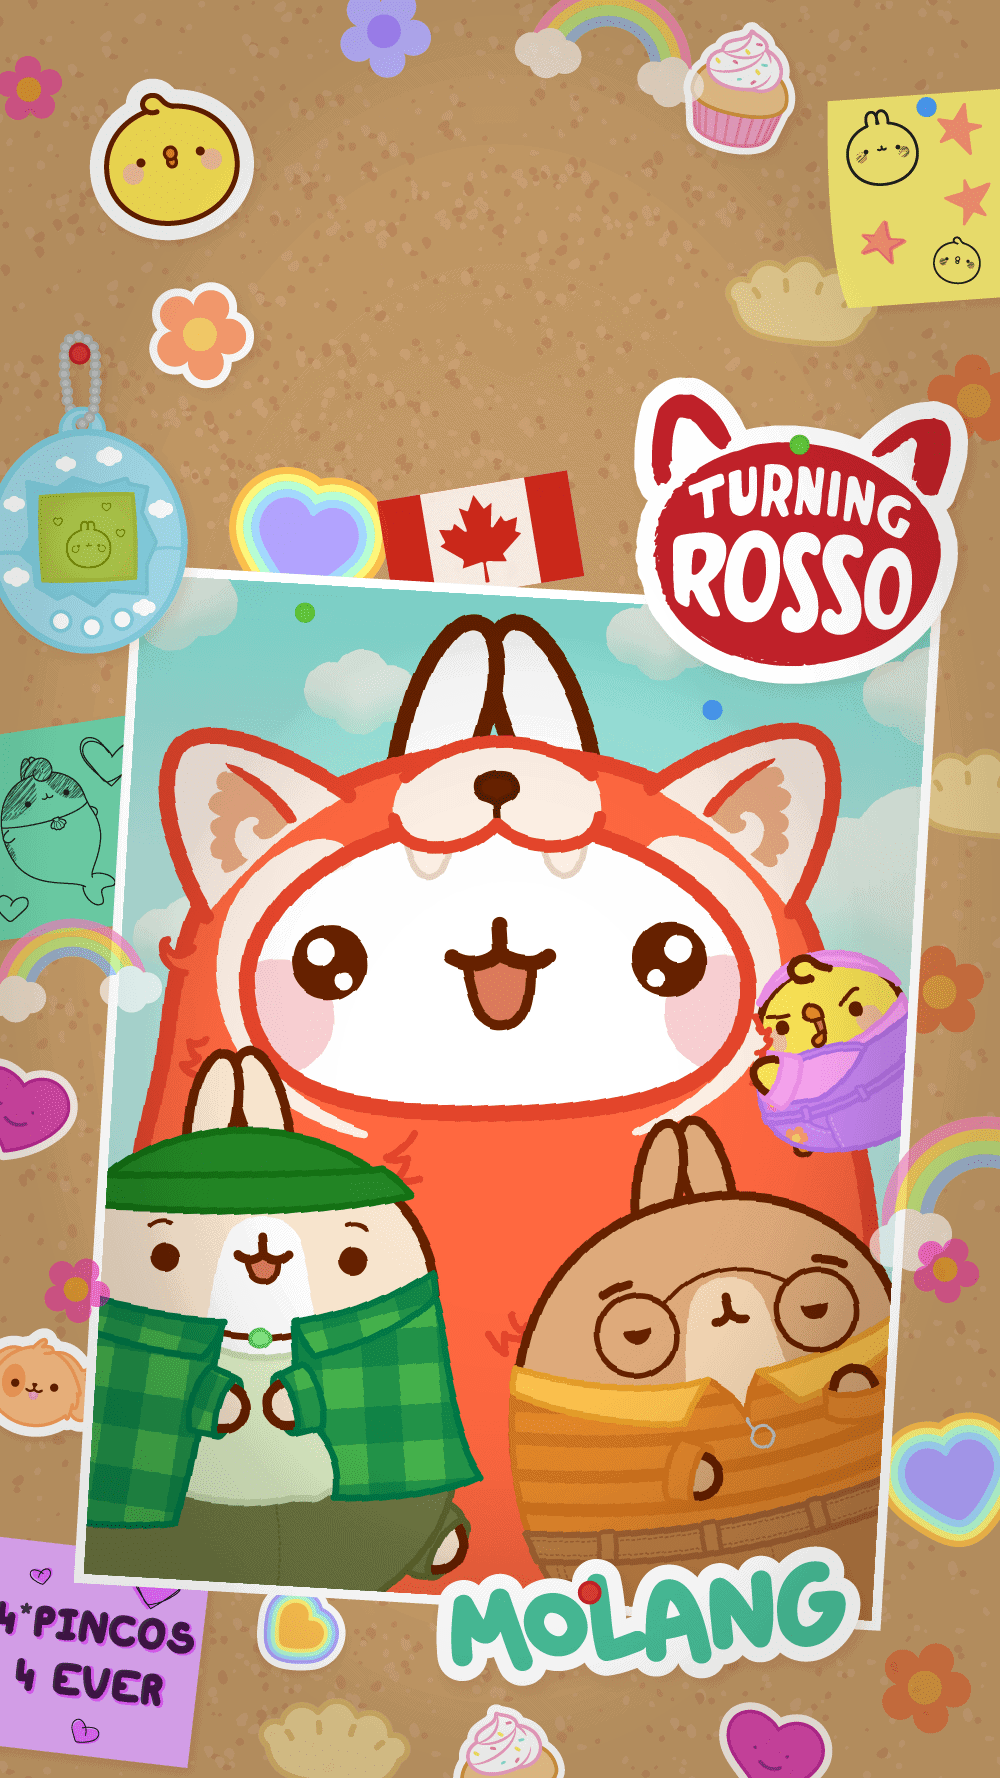 Molang and Piu Piu are turning Rosso into a Canadian citizen! - Molang